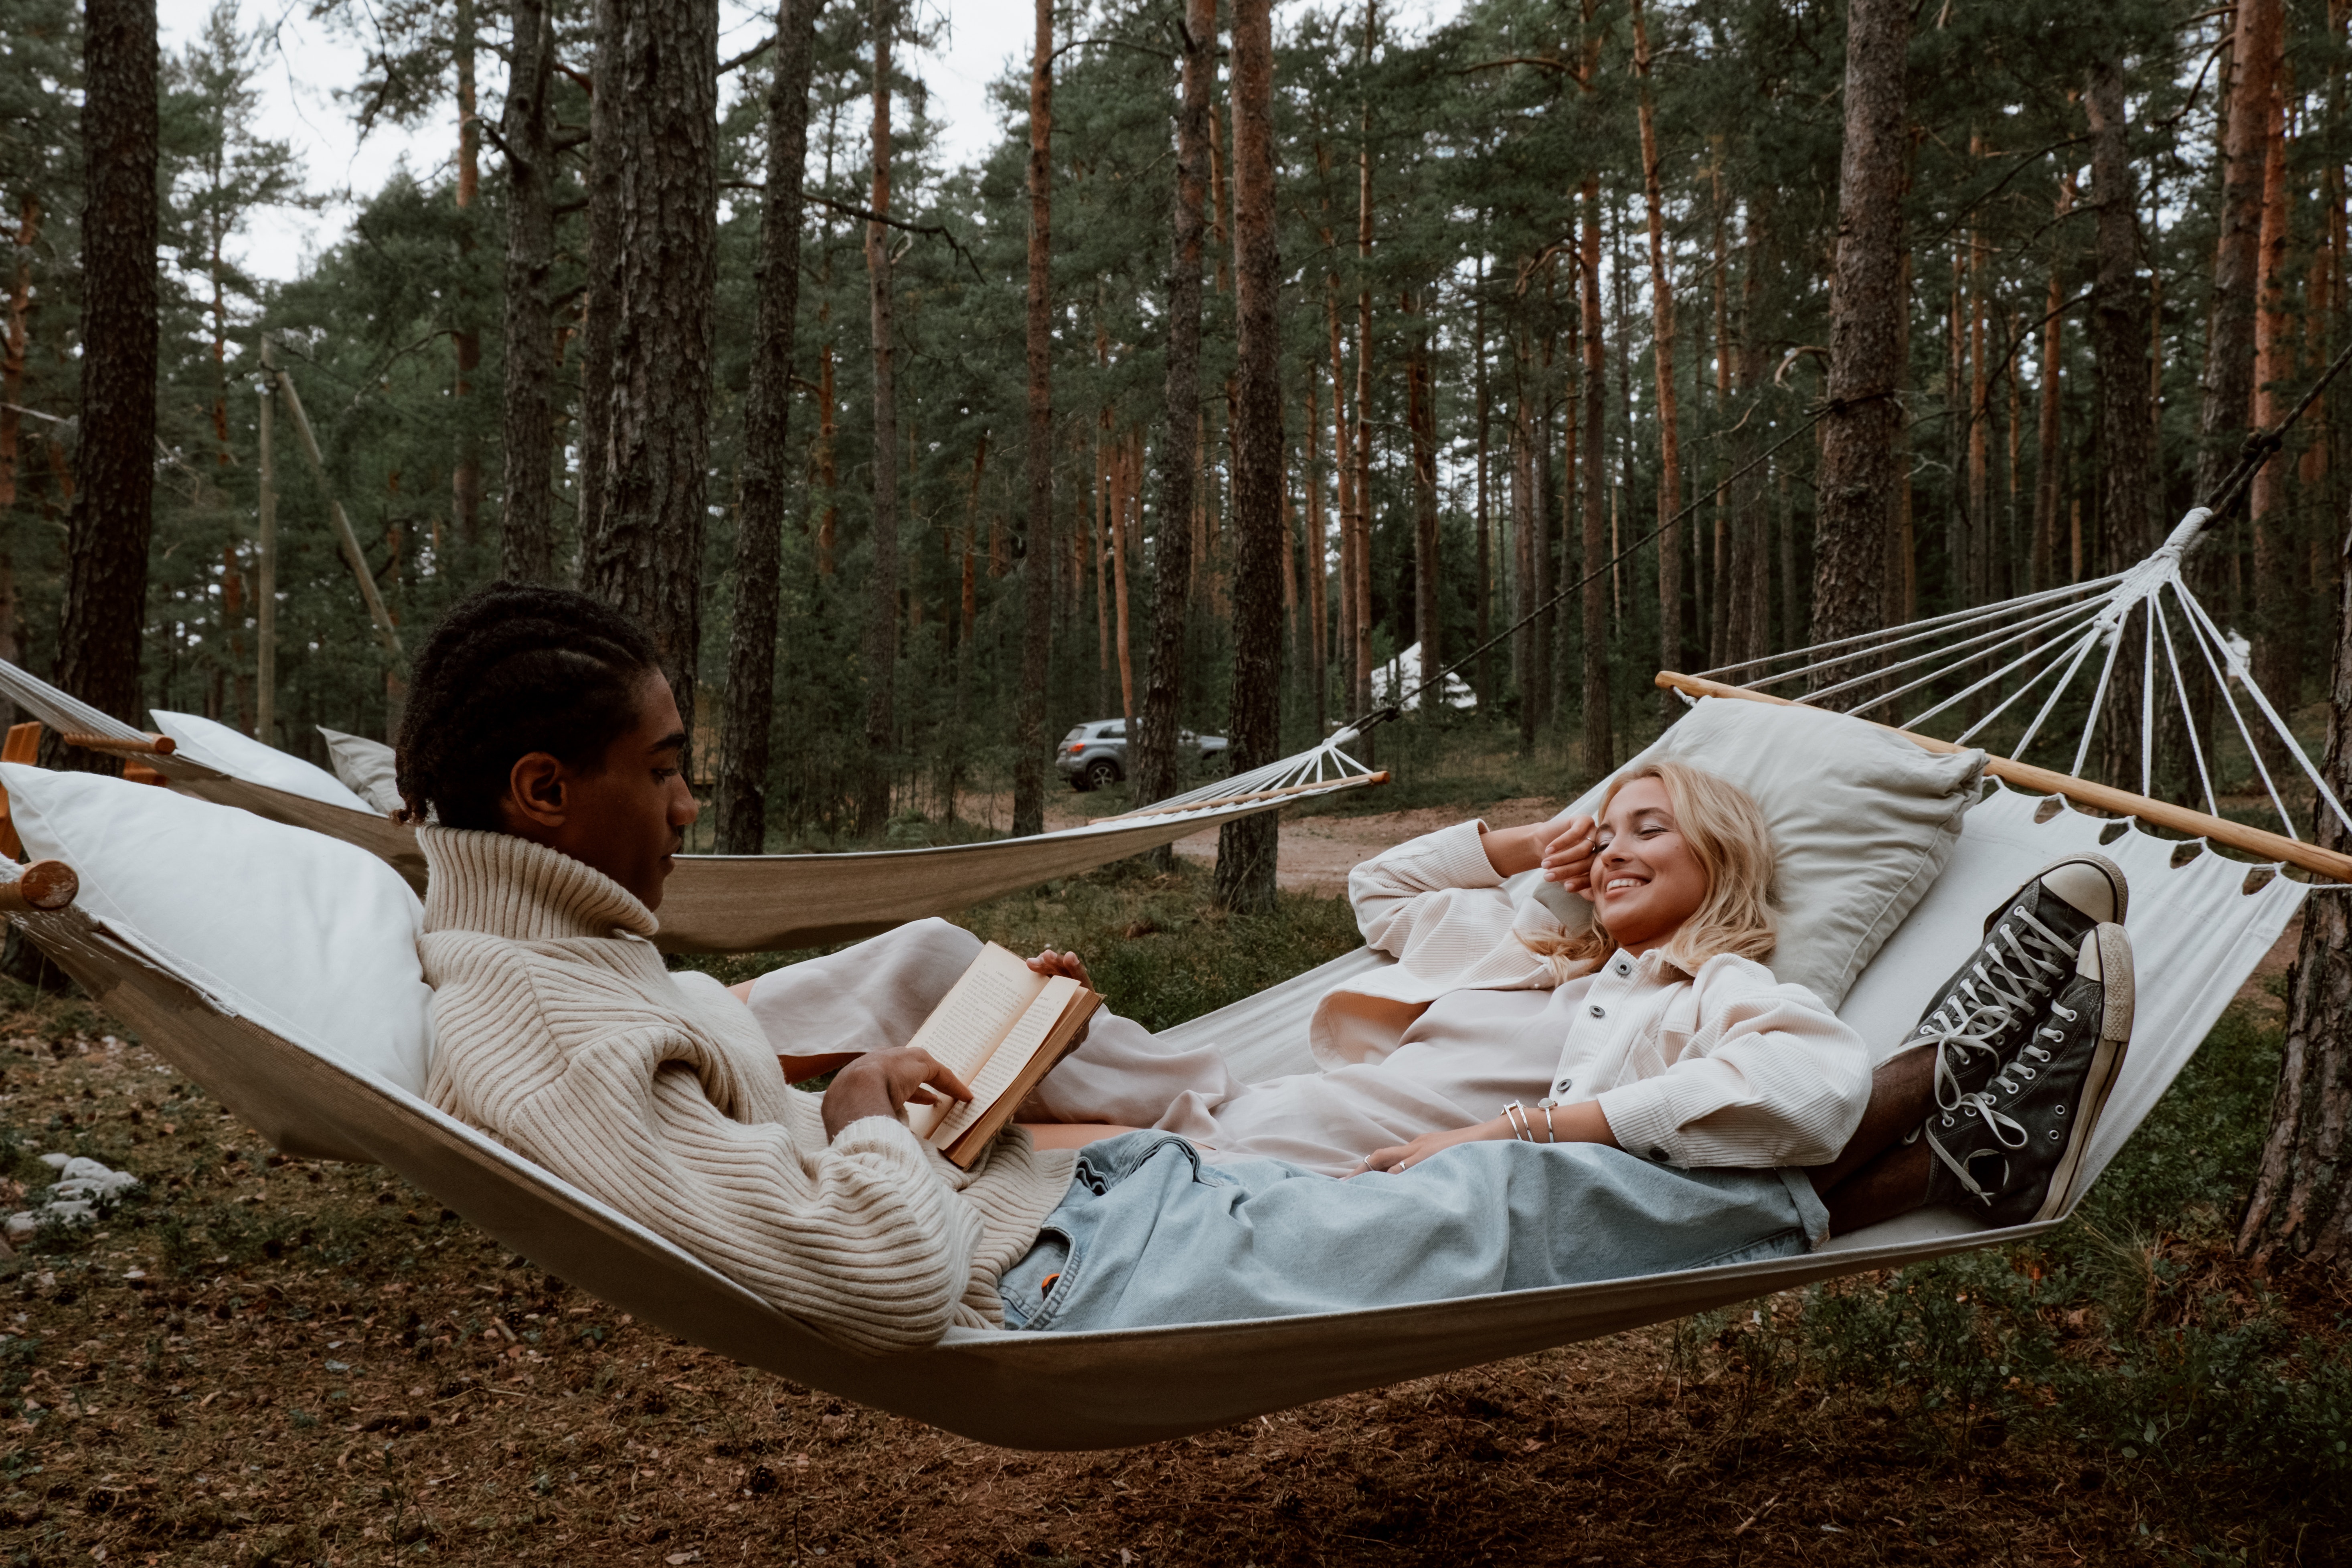 A man and a woman lounging in the middle of the woods. | Source: Pexels